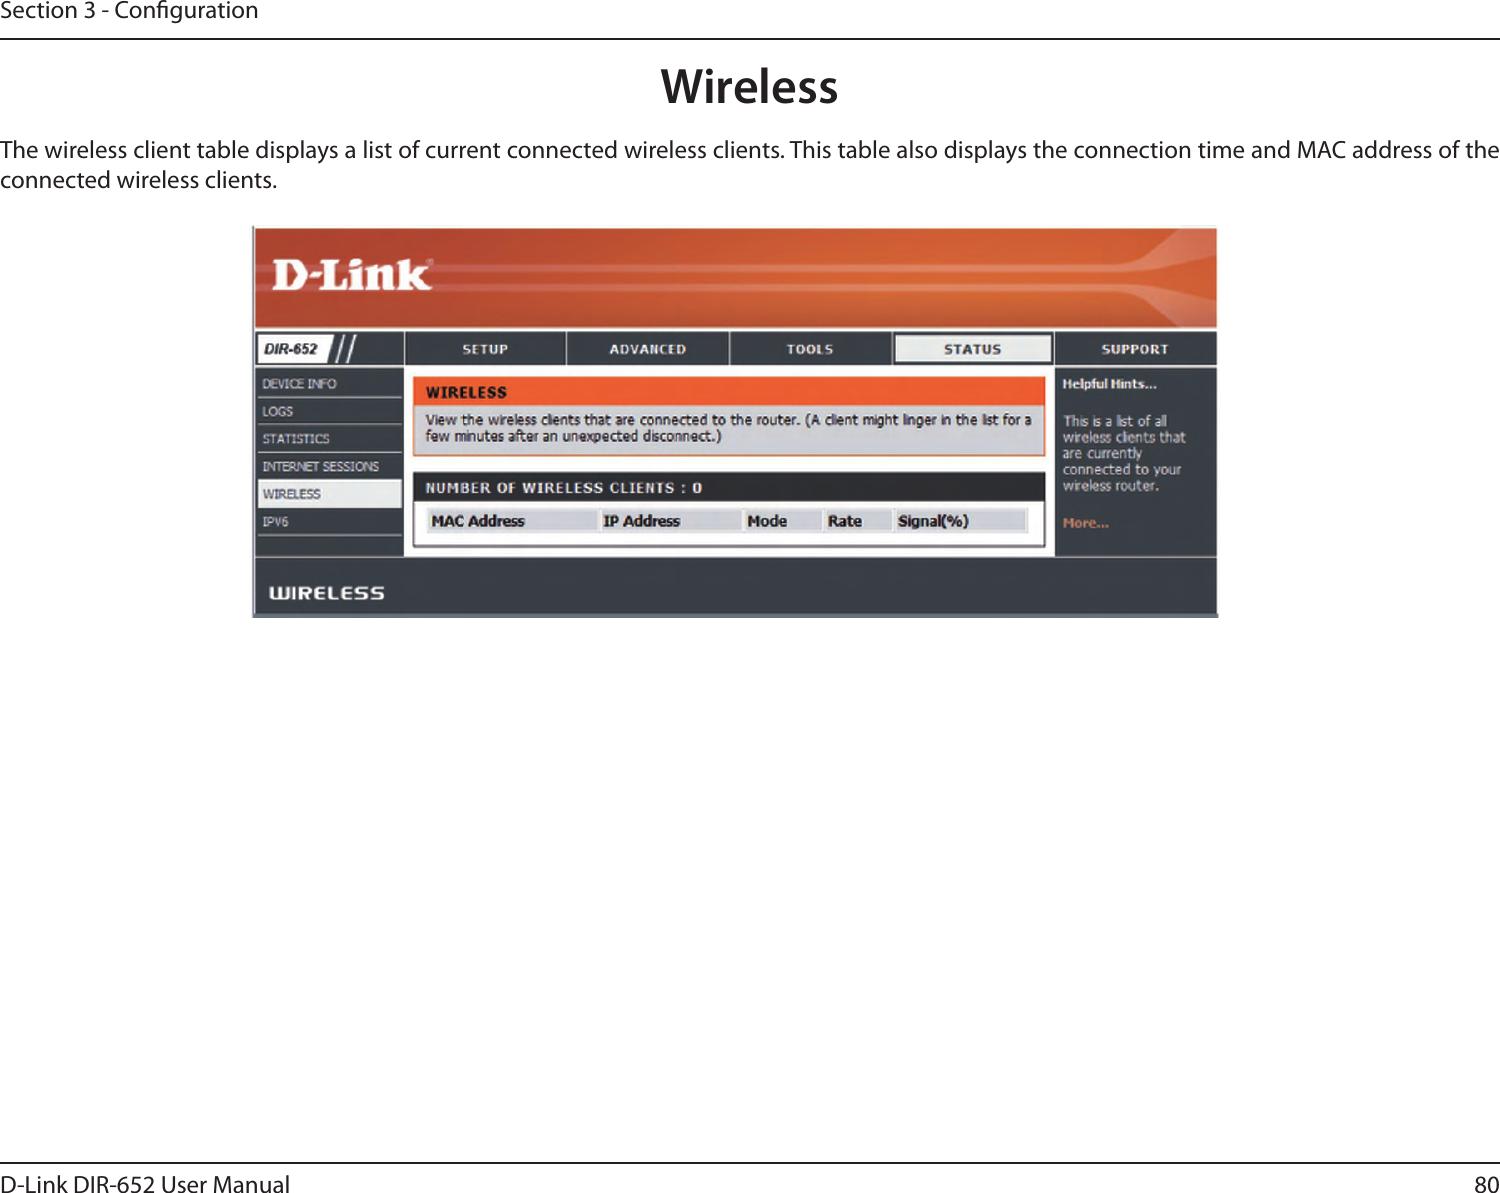 80D-Link DIR-652 User ManualSection 3 - CongurationThe wireless client table displays a list of current connected wireless clients. This table also displays the connection time and MAC address of the connected wireless clients.Wireless